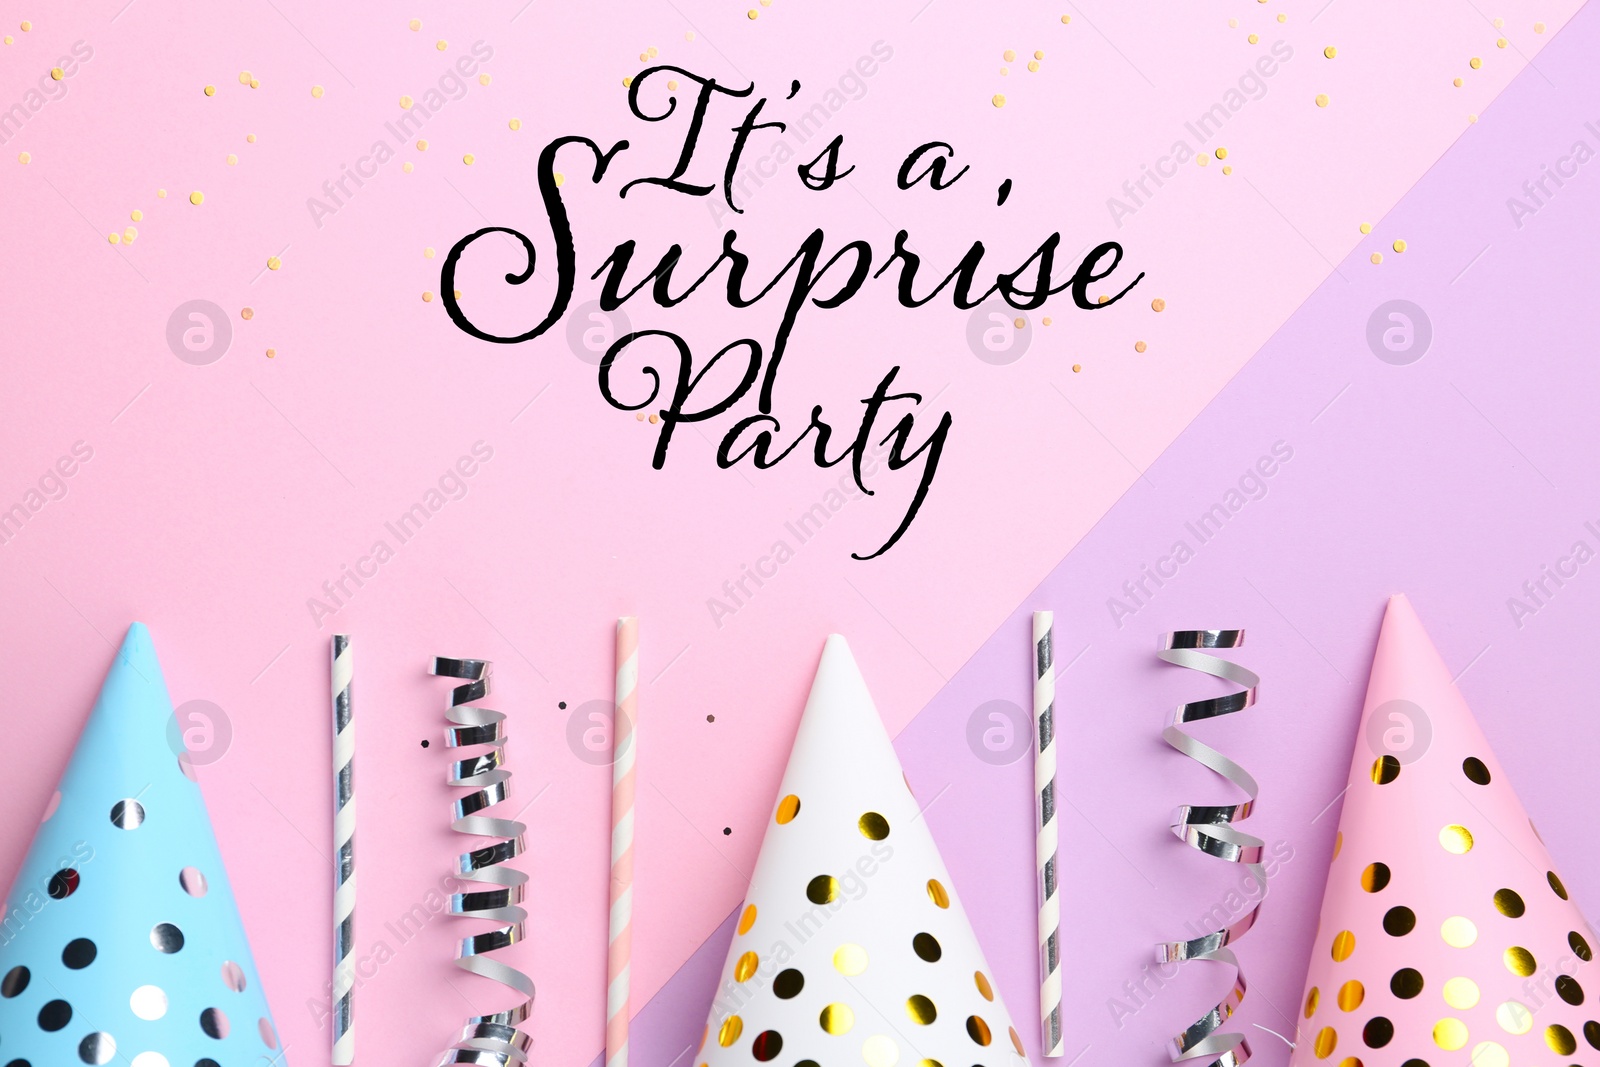 Image of It's a surprise party. Flat lay composition with paper hats on color background